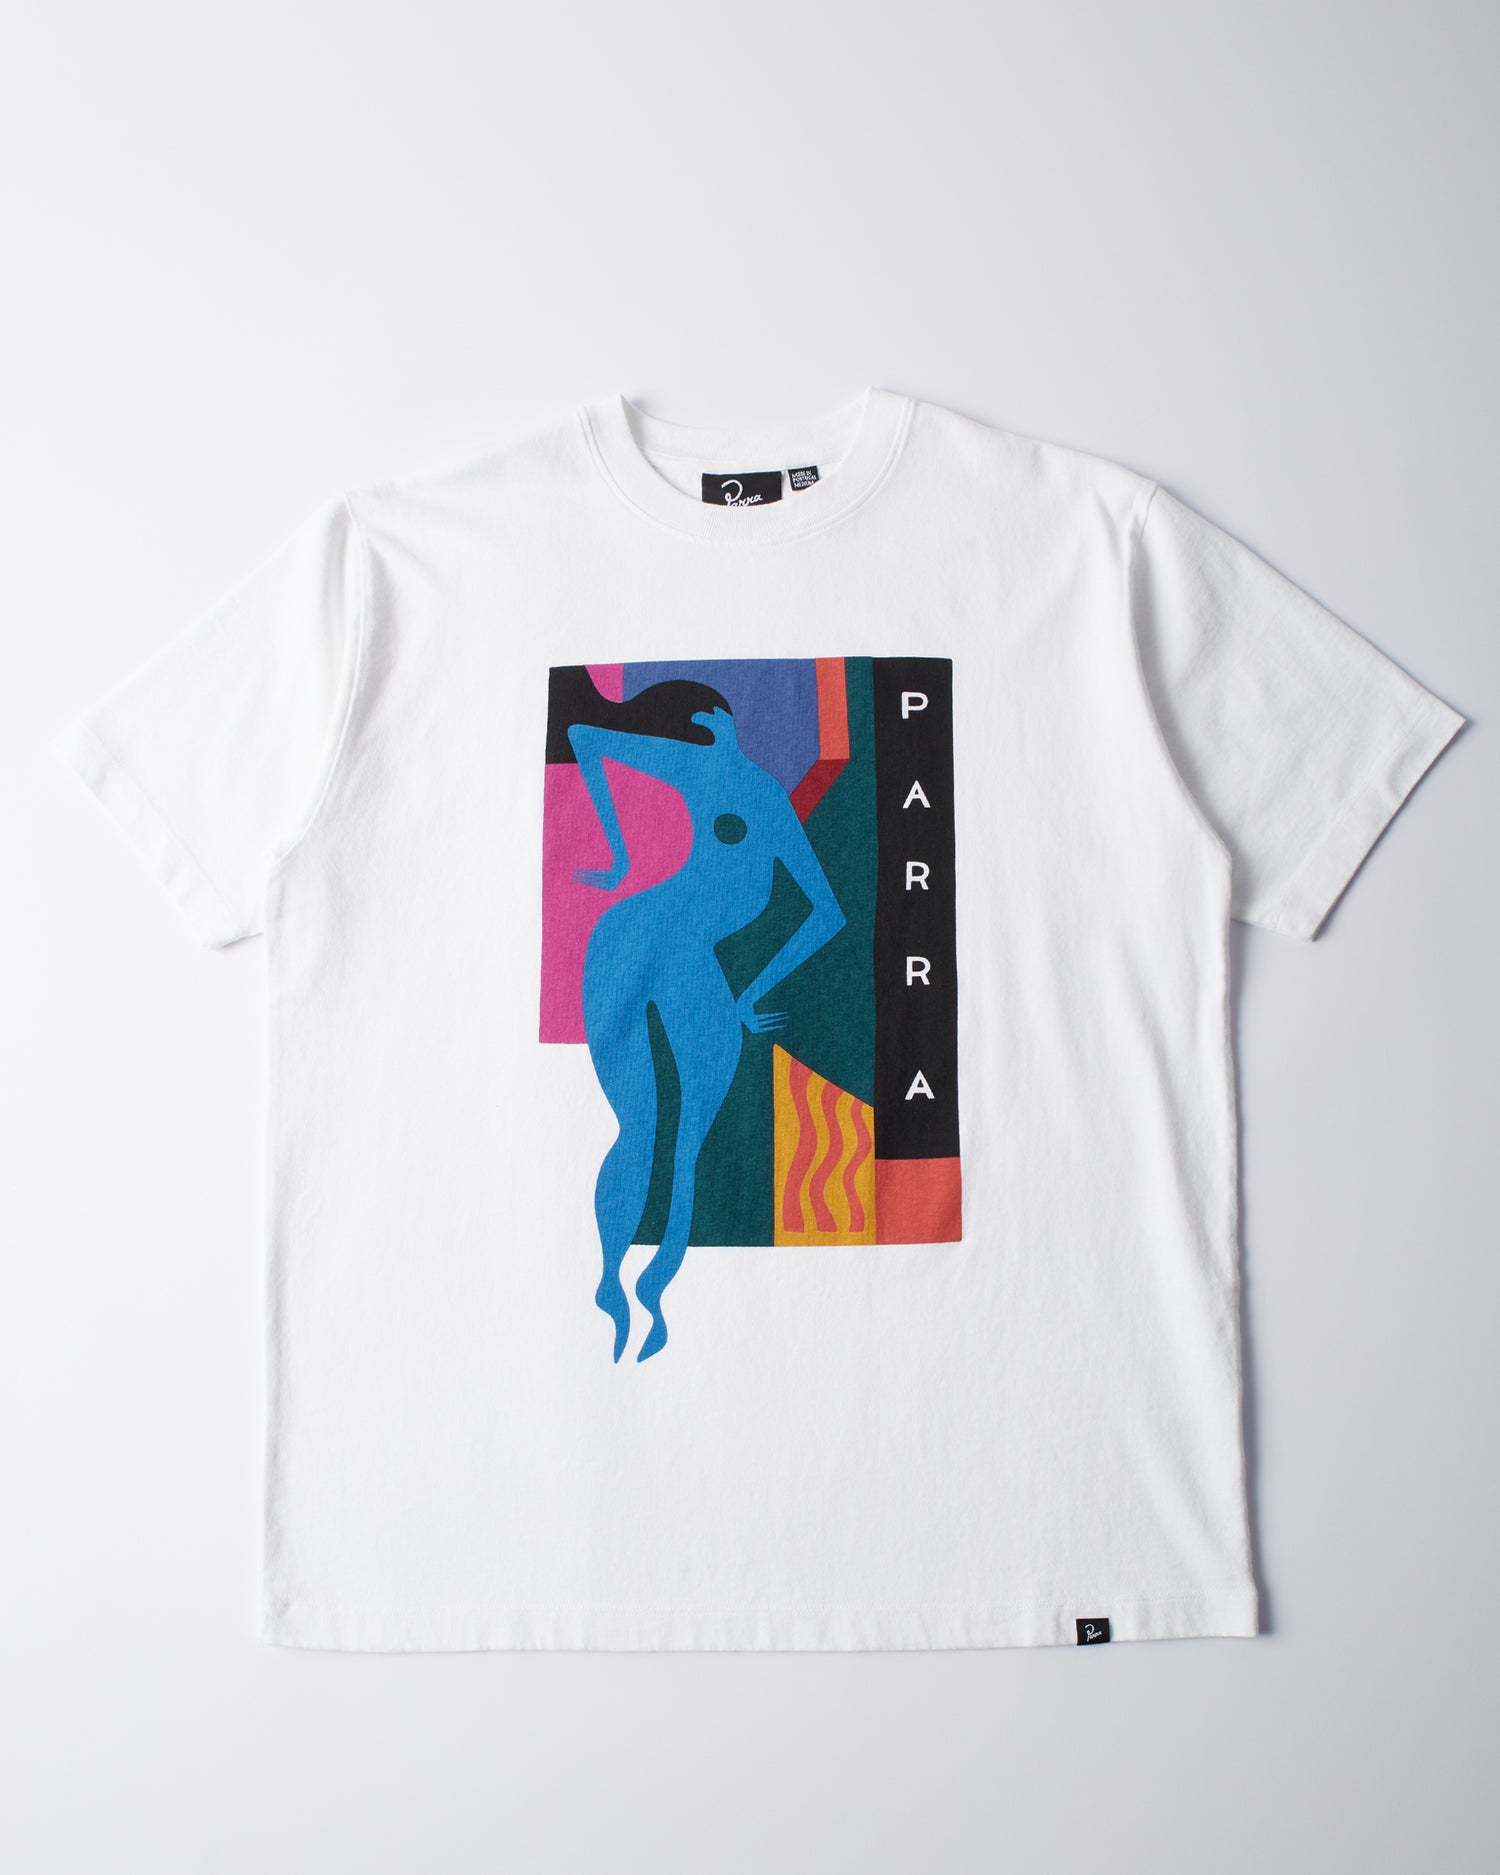 byParra Beached and Blank T-shirt (White)